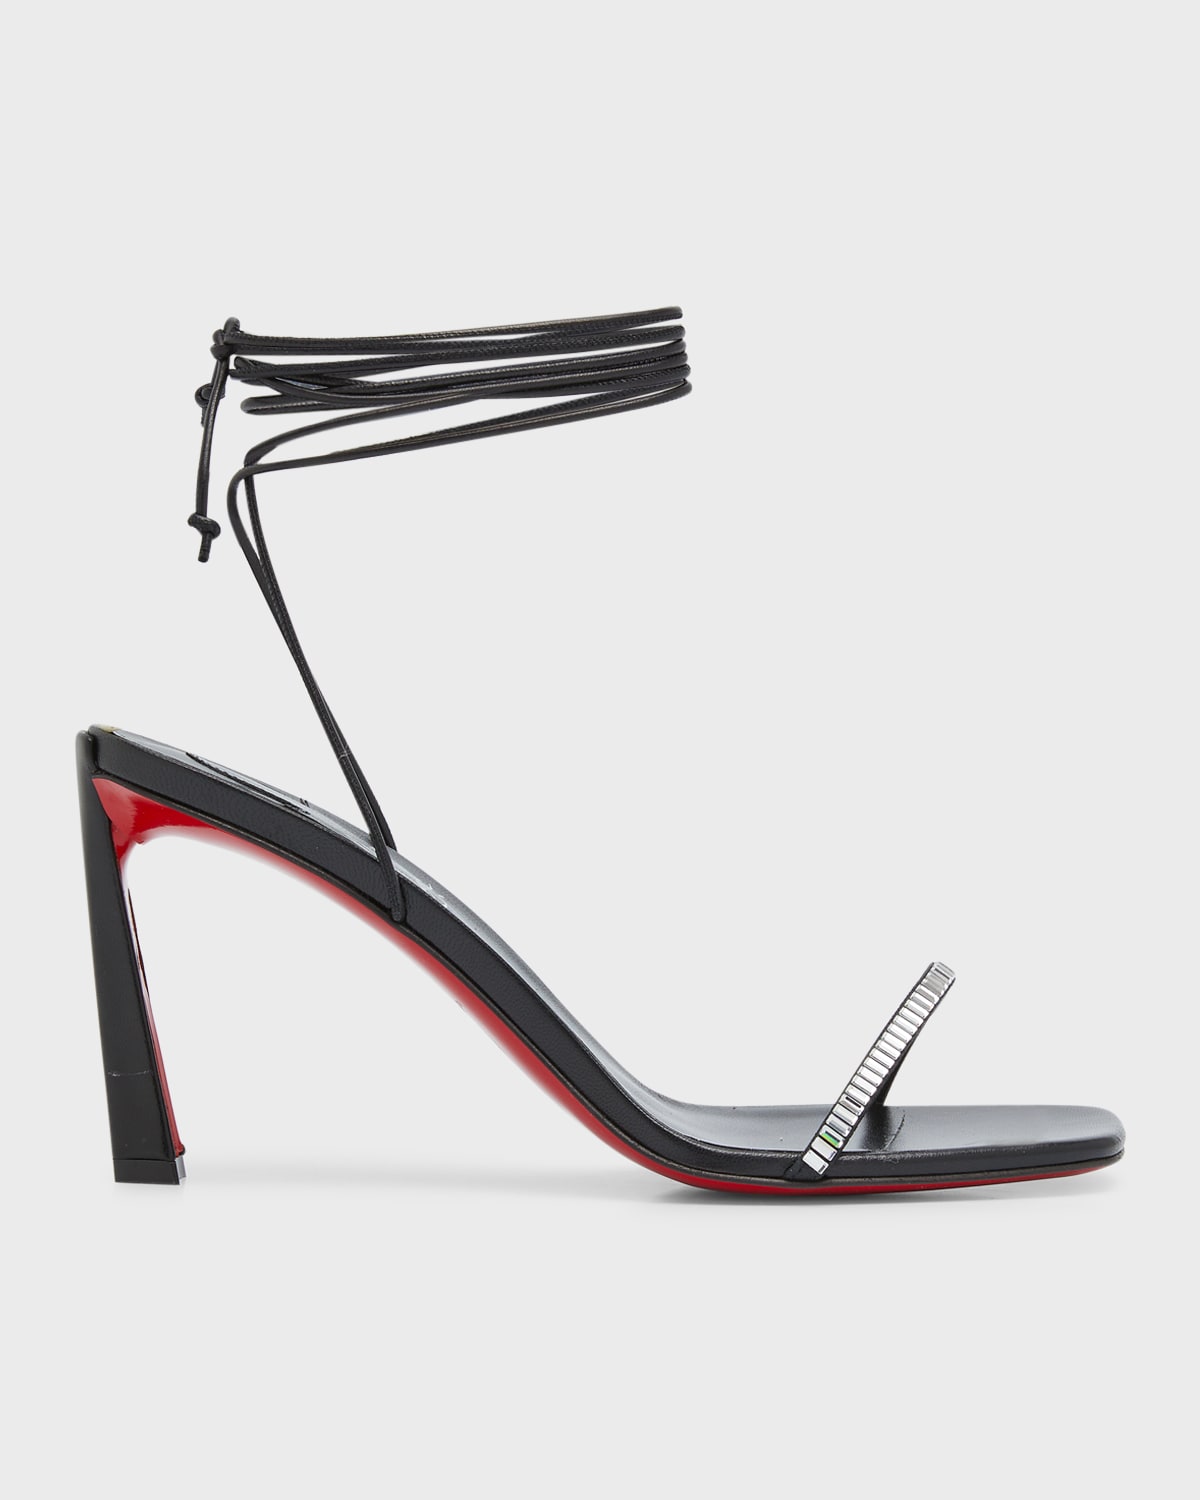 CHRISTIAN LOUBOUTIN CONDORA CRYSTAL ANKLE-WRAP RED SOLE SANDALS